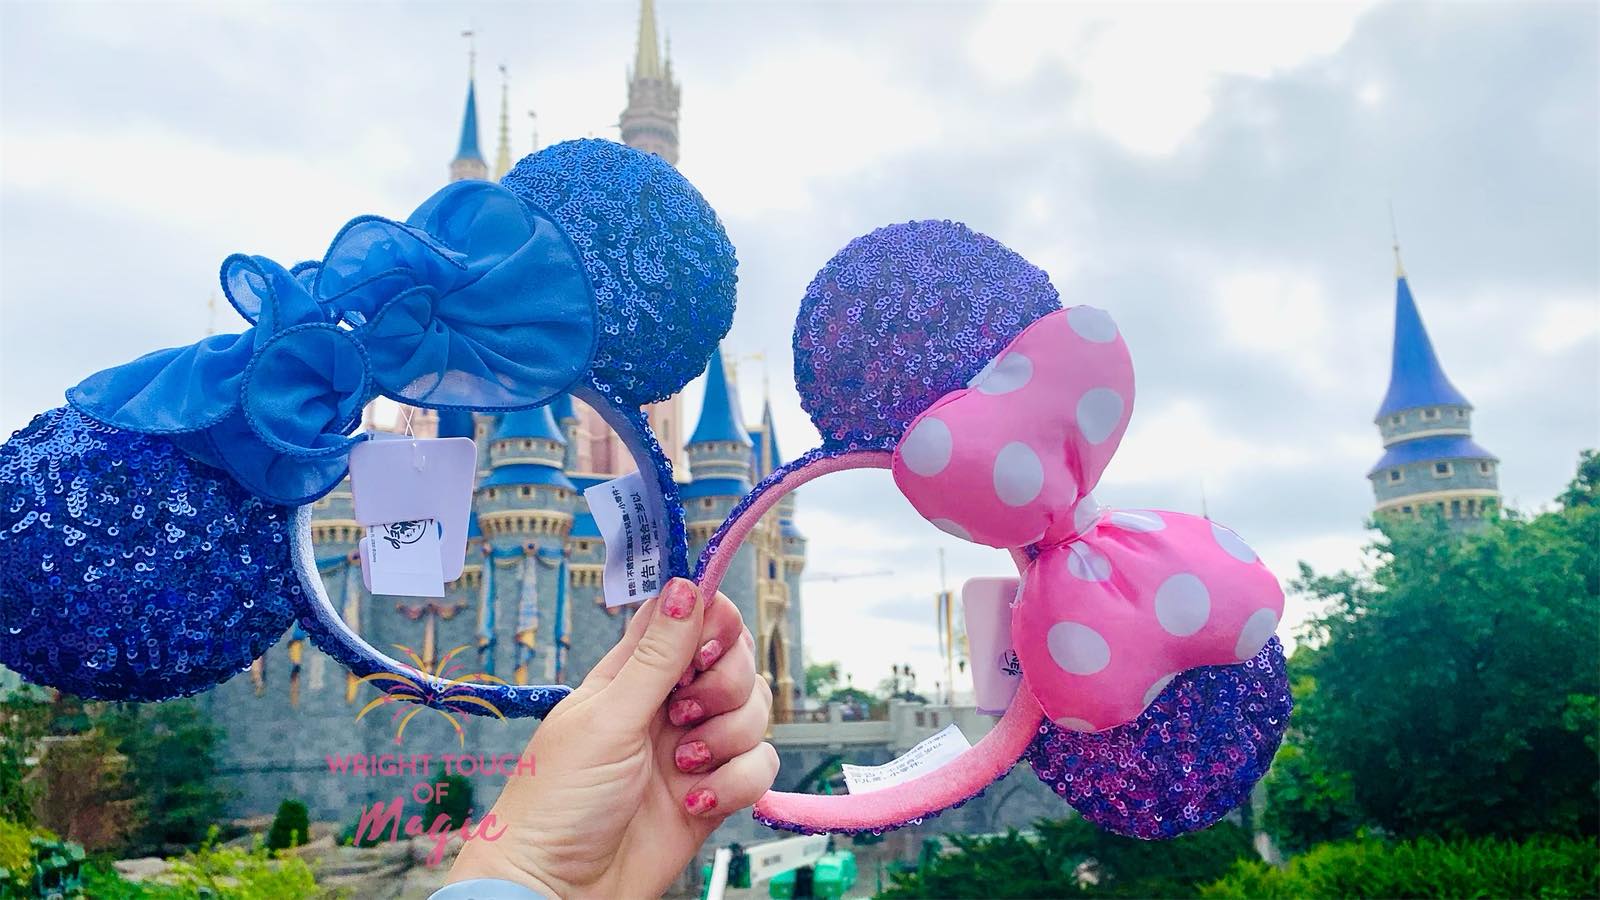 New Springtime Minnie Ears are in bloom at Disney World